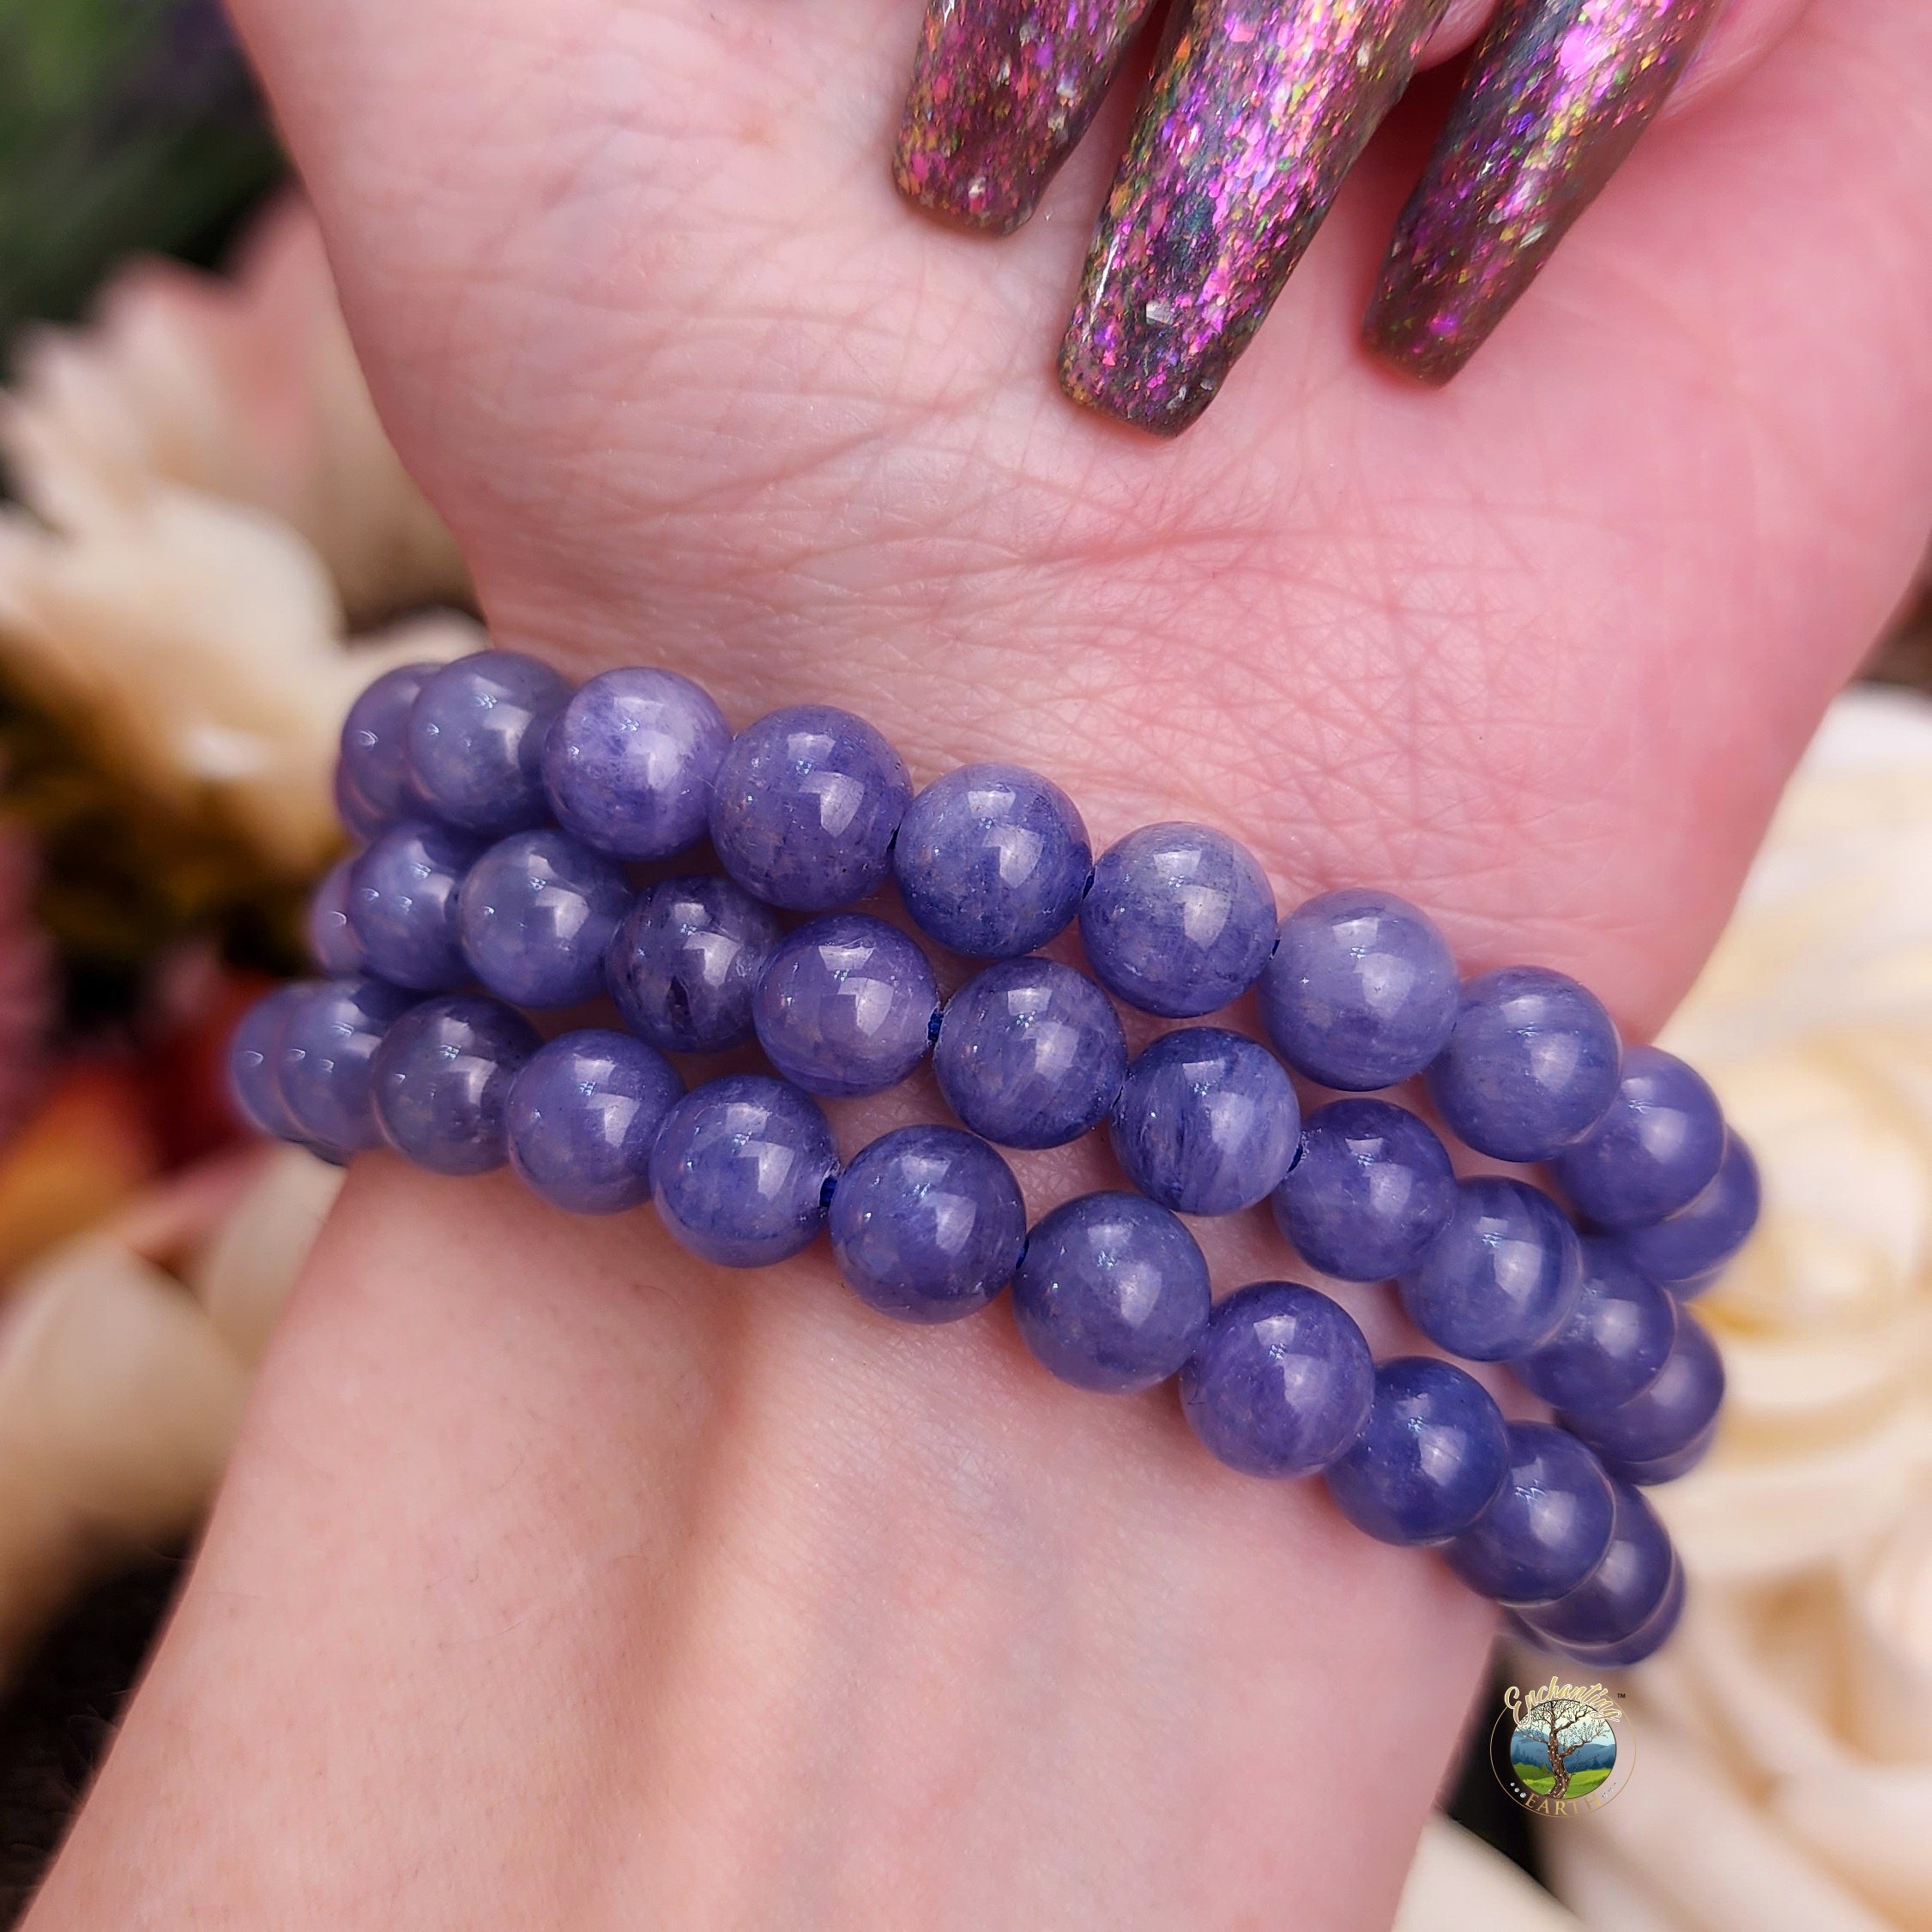 Tanzanite Bracelet (High Quality) for Compassion, Intuition & Raising your Vibration